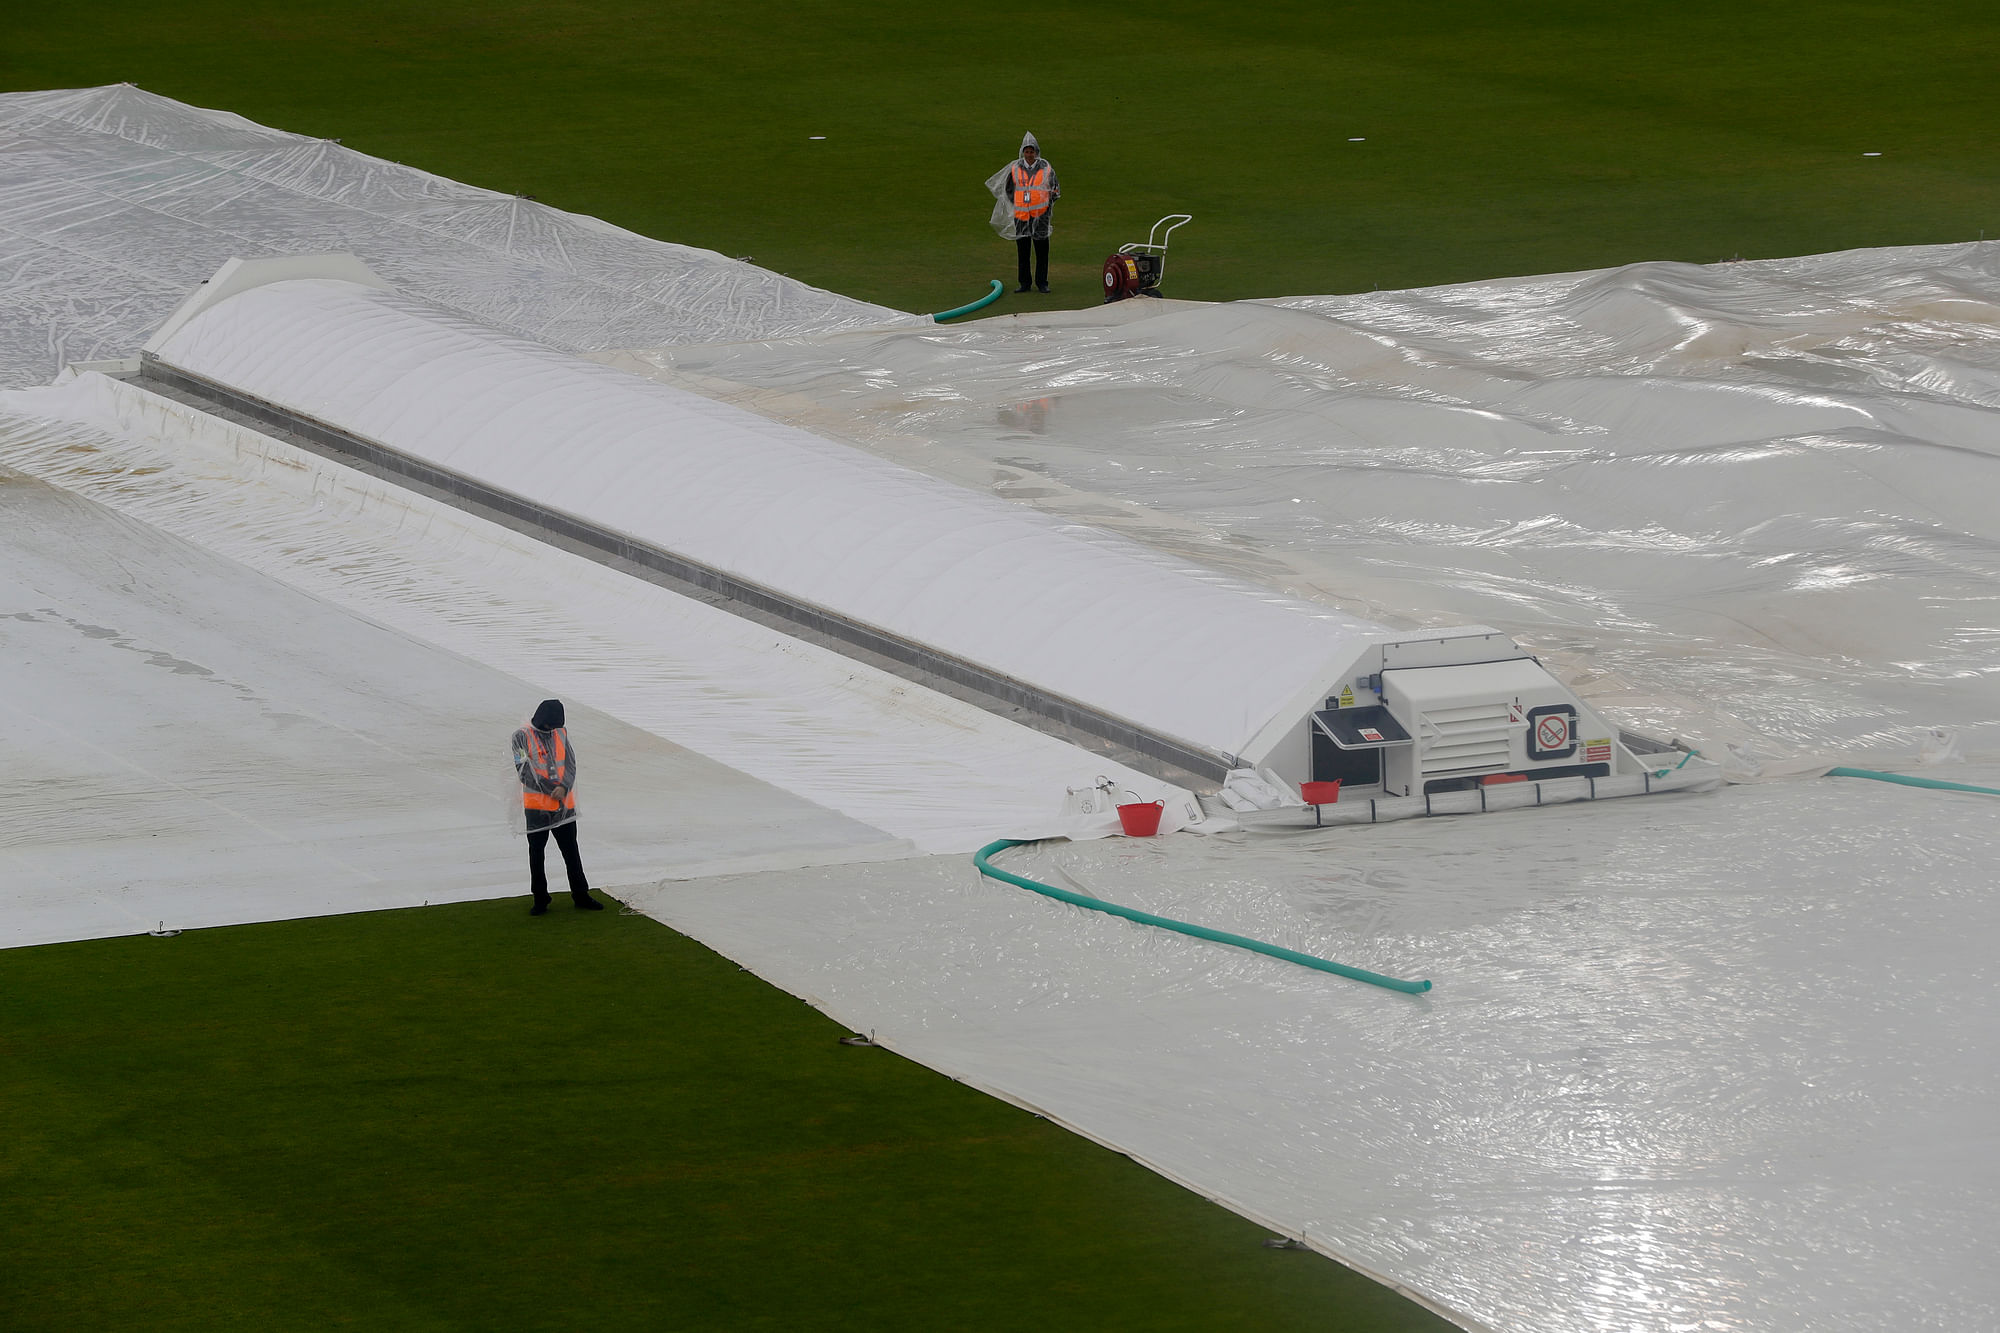 File: Stewards stand alongside rain covers on the pitch after play was stopped due to rain during the World Cup cricket match between South Africa and the West Indies at The Ageas Bowl in Southampton.